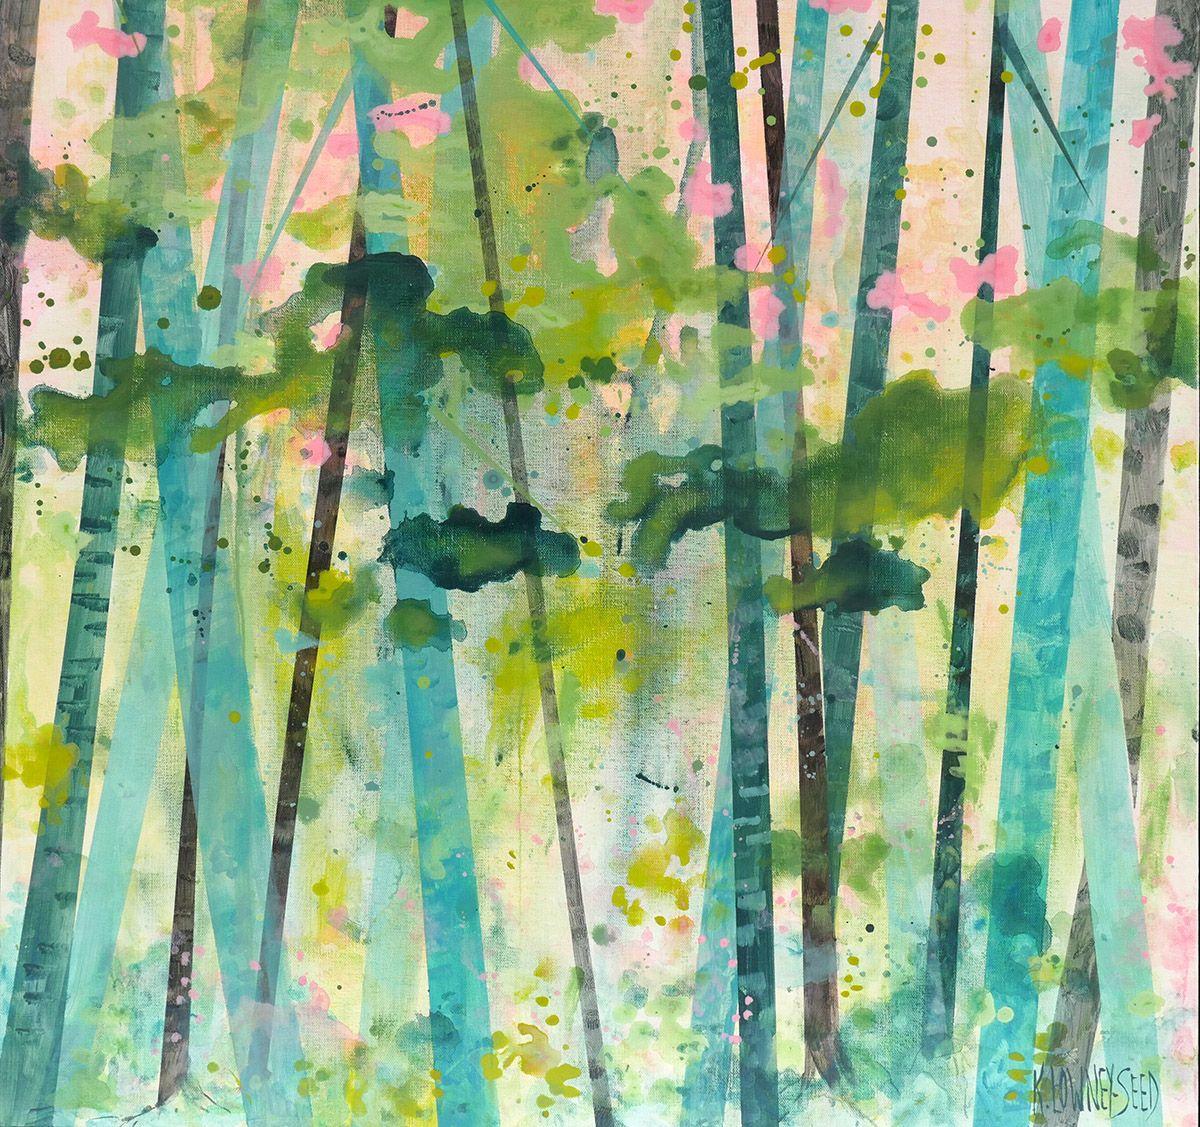 This if from my Forest  Series, this is an ongoing series that I continue to work in different ways - some are multiple panels and this is a single panel. They are layered and rich with transparencies and interesting details.  :: Painting ::